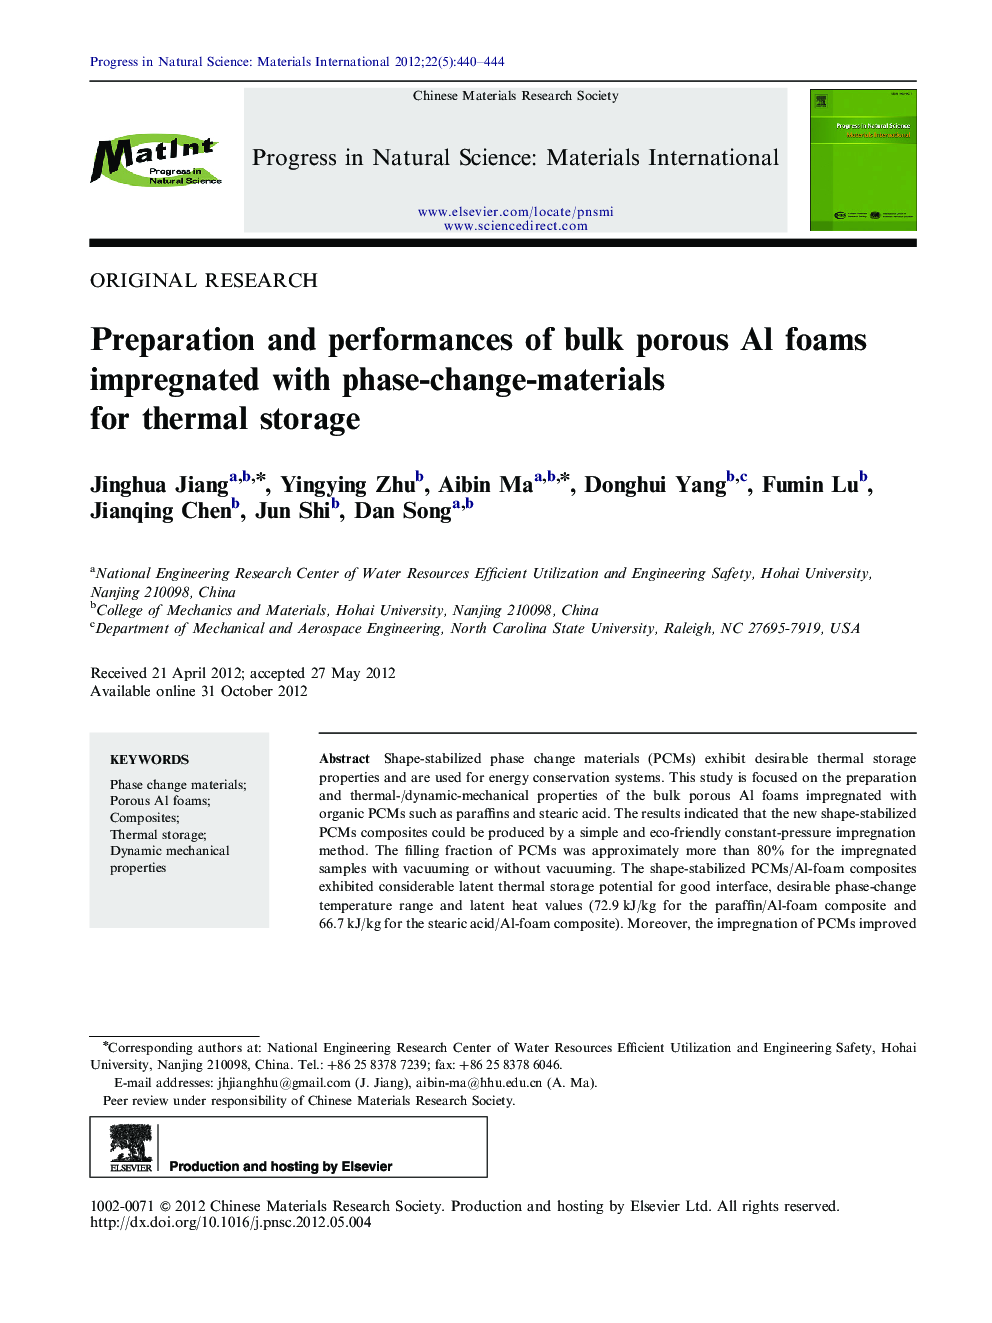 Preparation and performances of bulk porous Al foams impregnated with phase-change-materials for thermal storage 